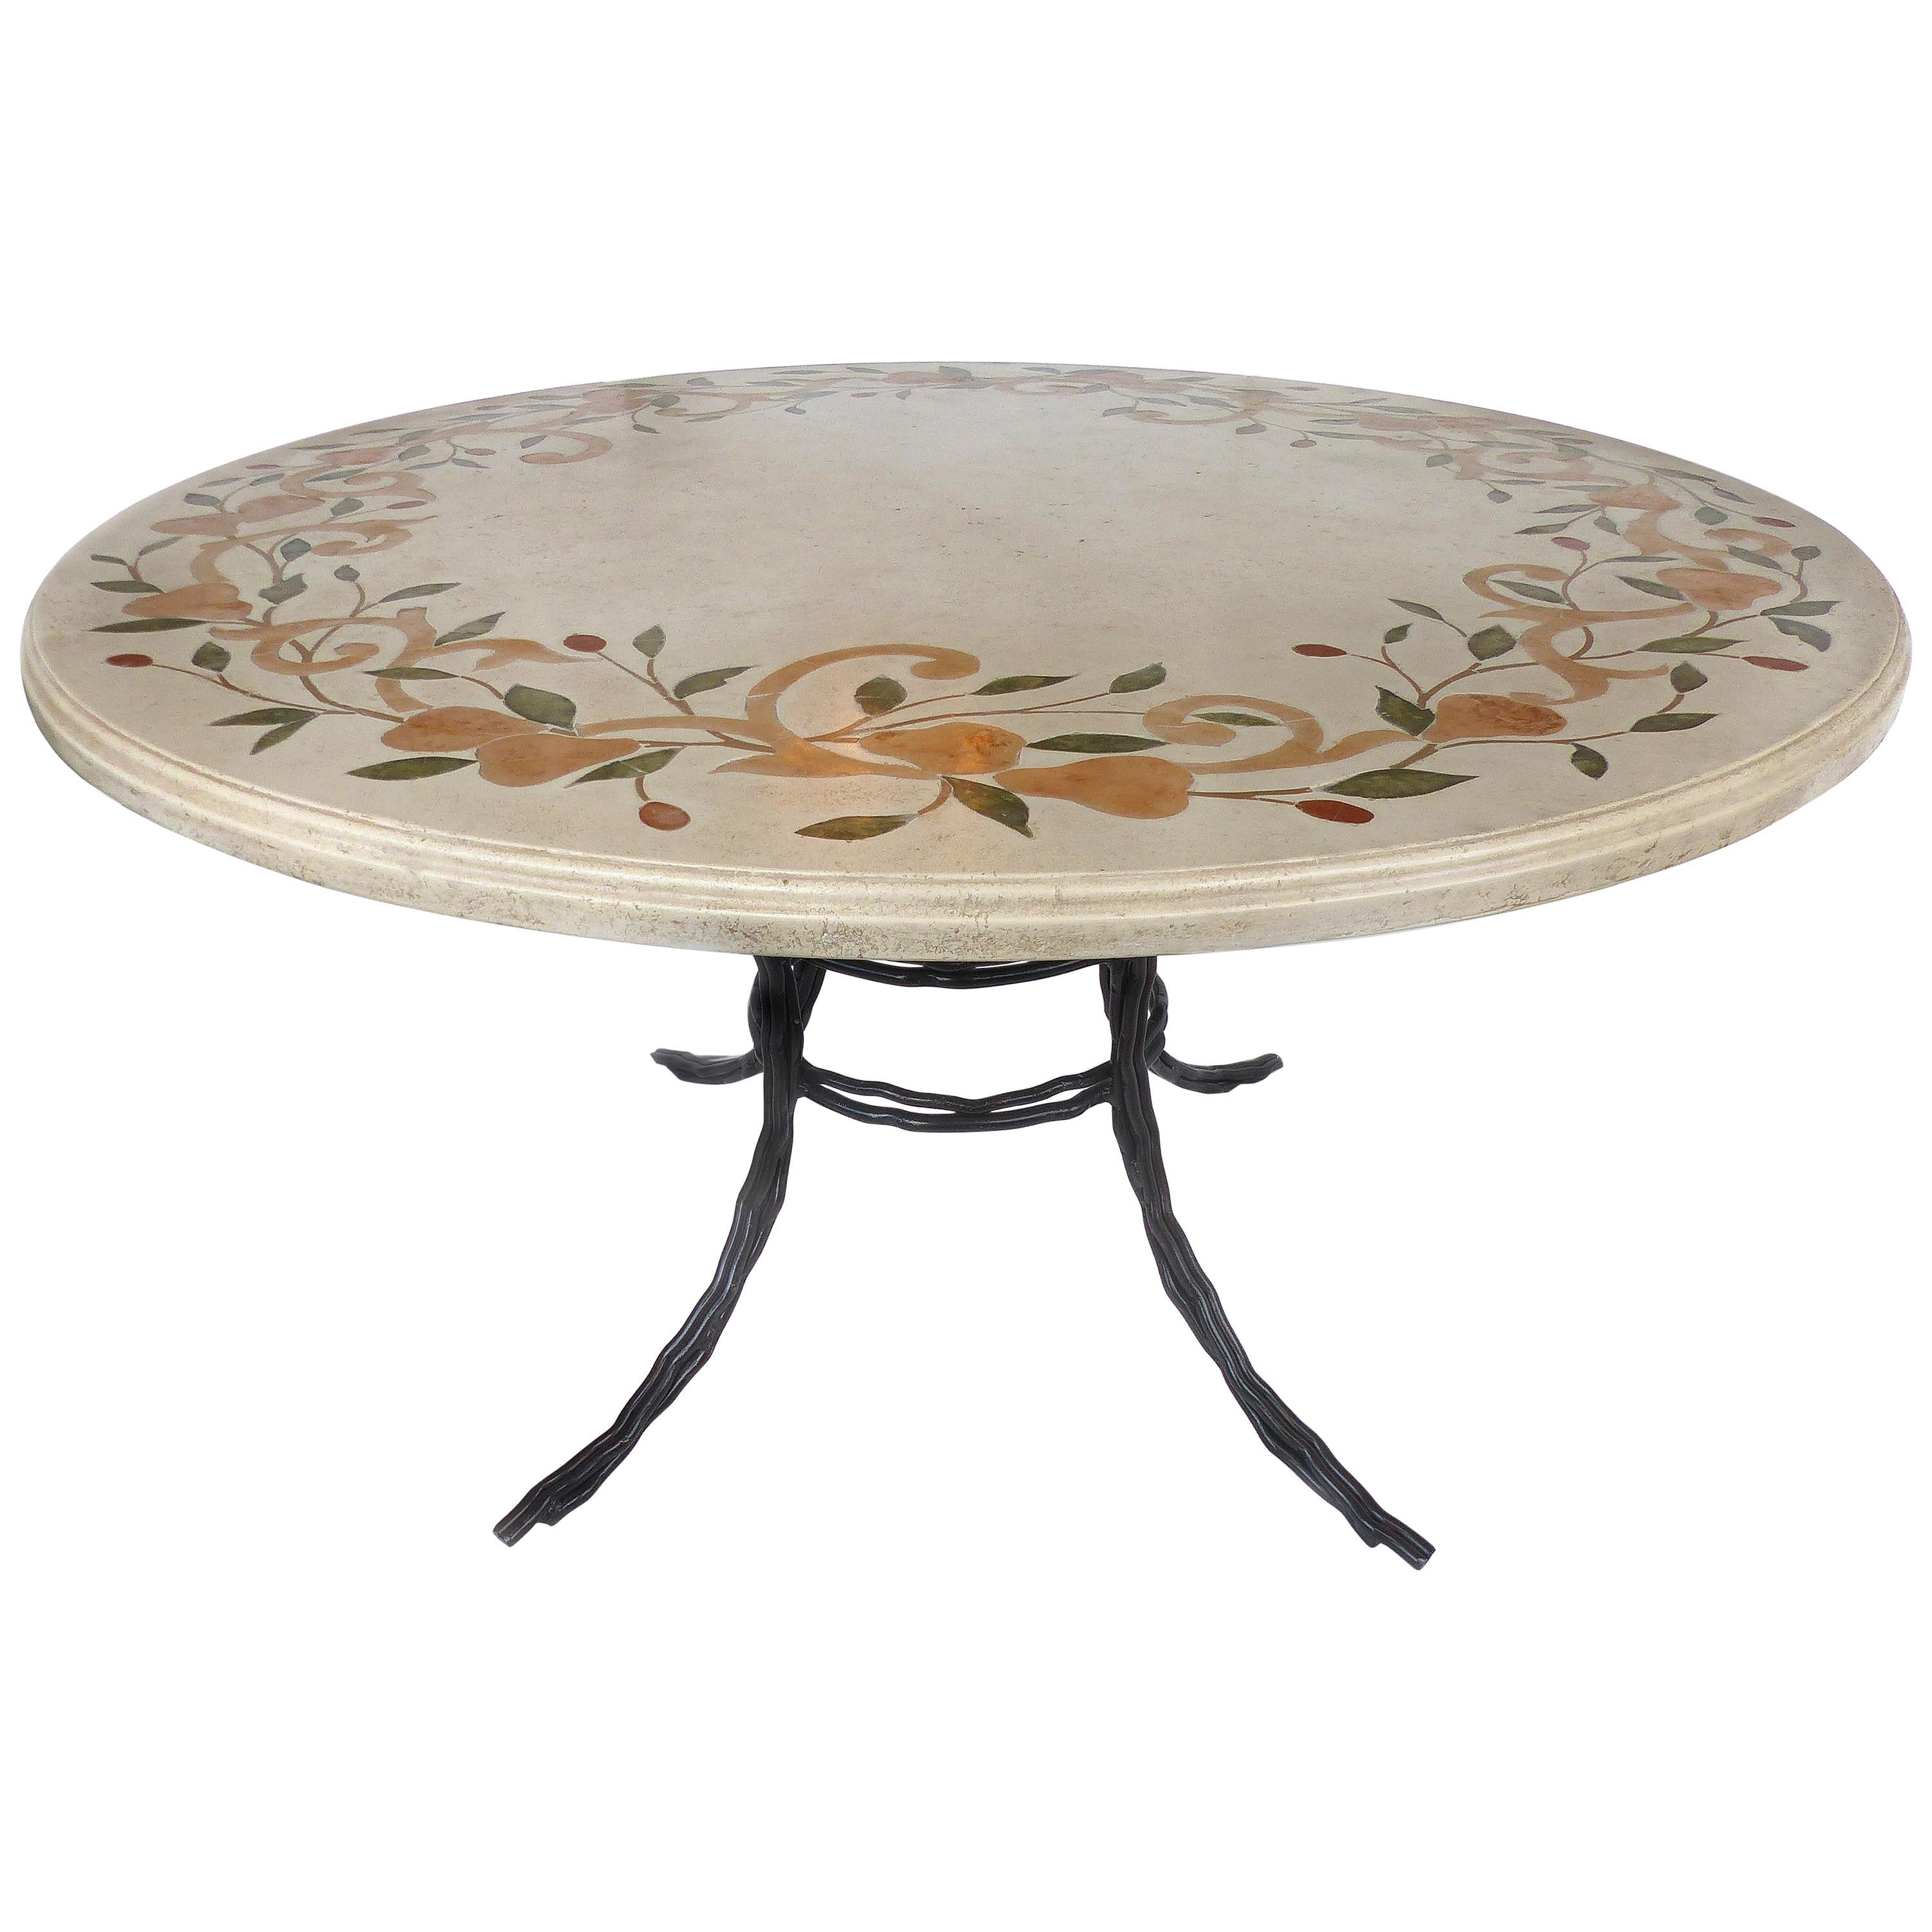 Round Dining Table, Hand Wrought Iron Base an Stone Composition Marble Inlay Top